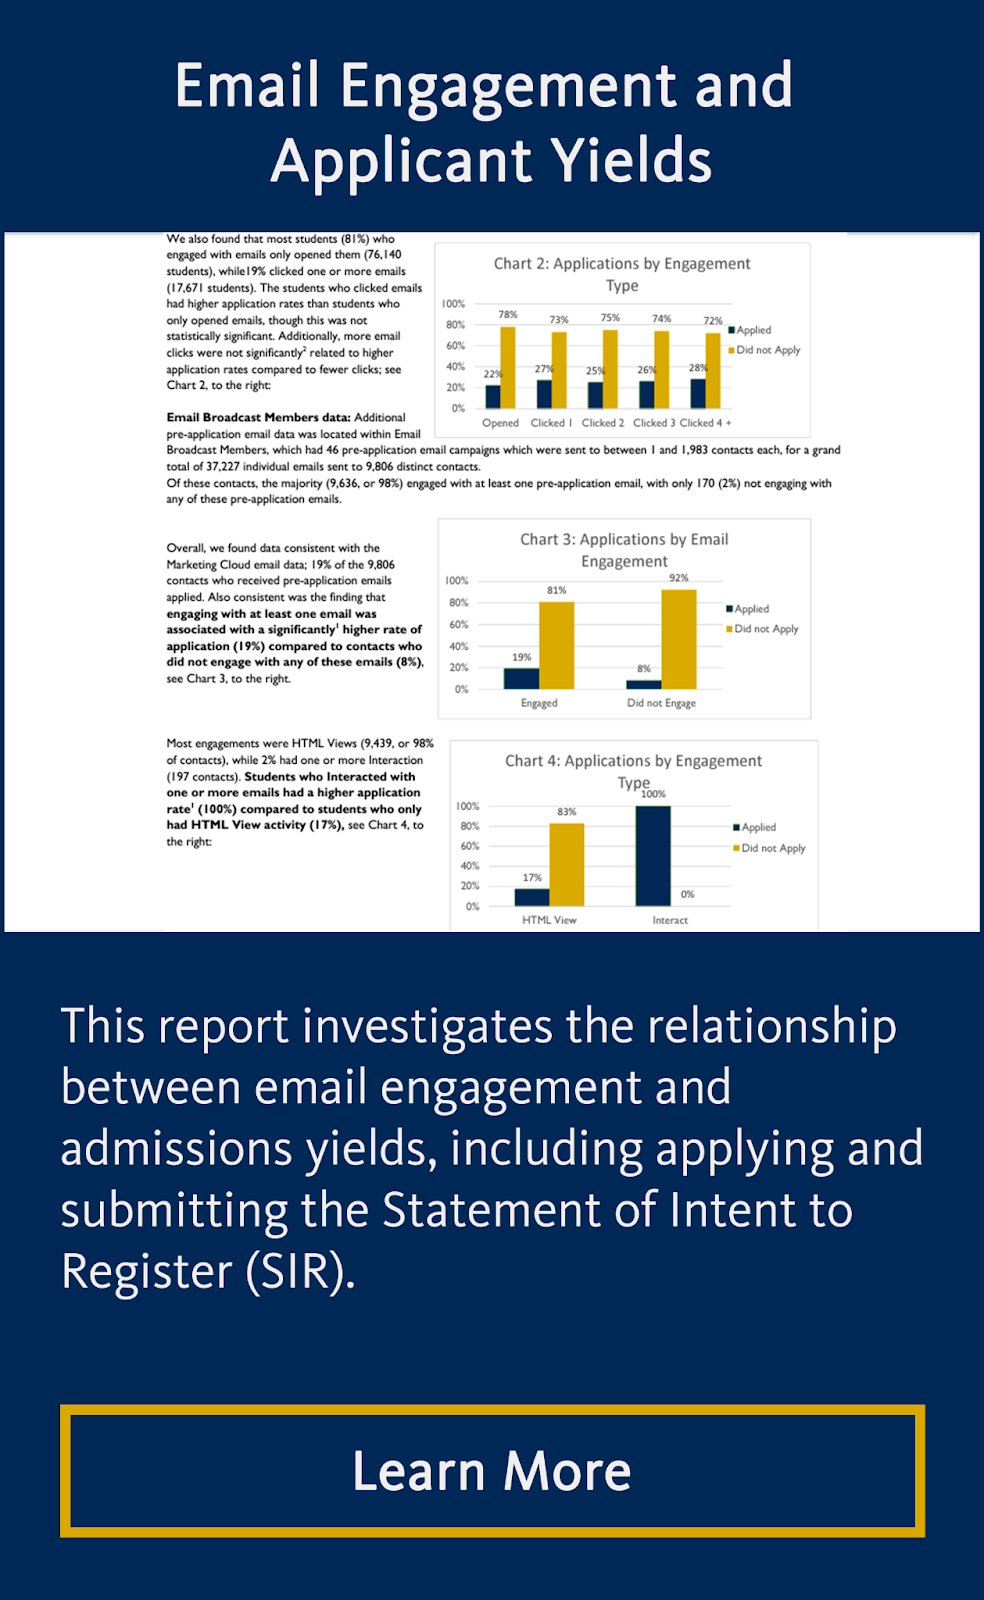 Email Engagement and Applicant Yield